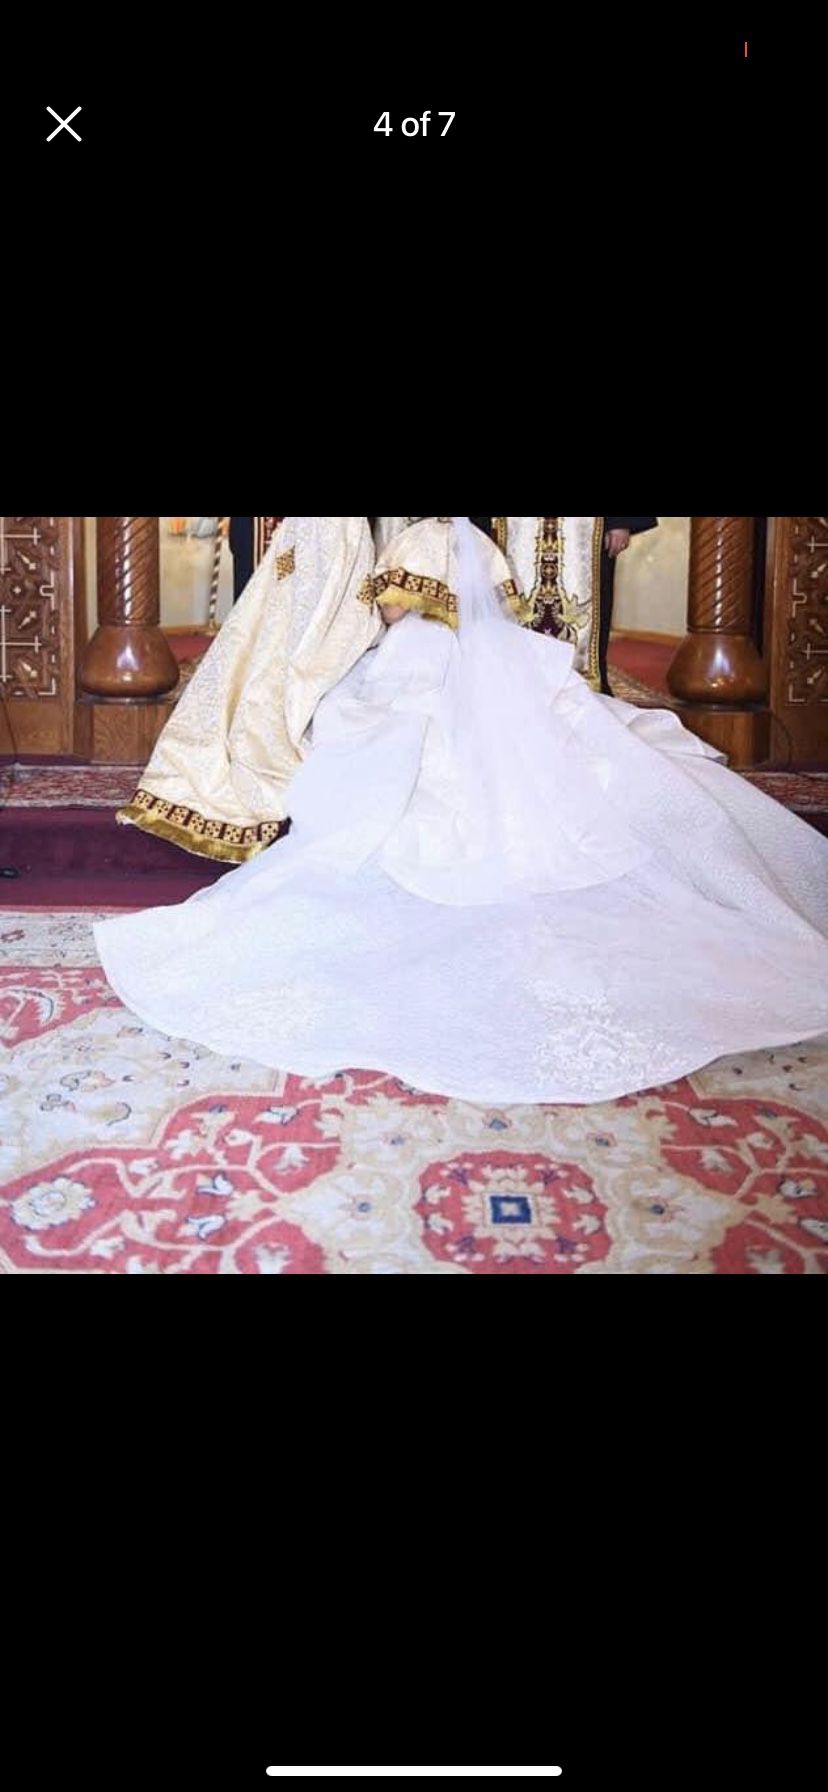 Wedding Dress Coming With Simple Long Veil 